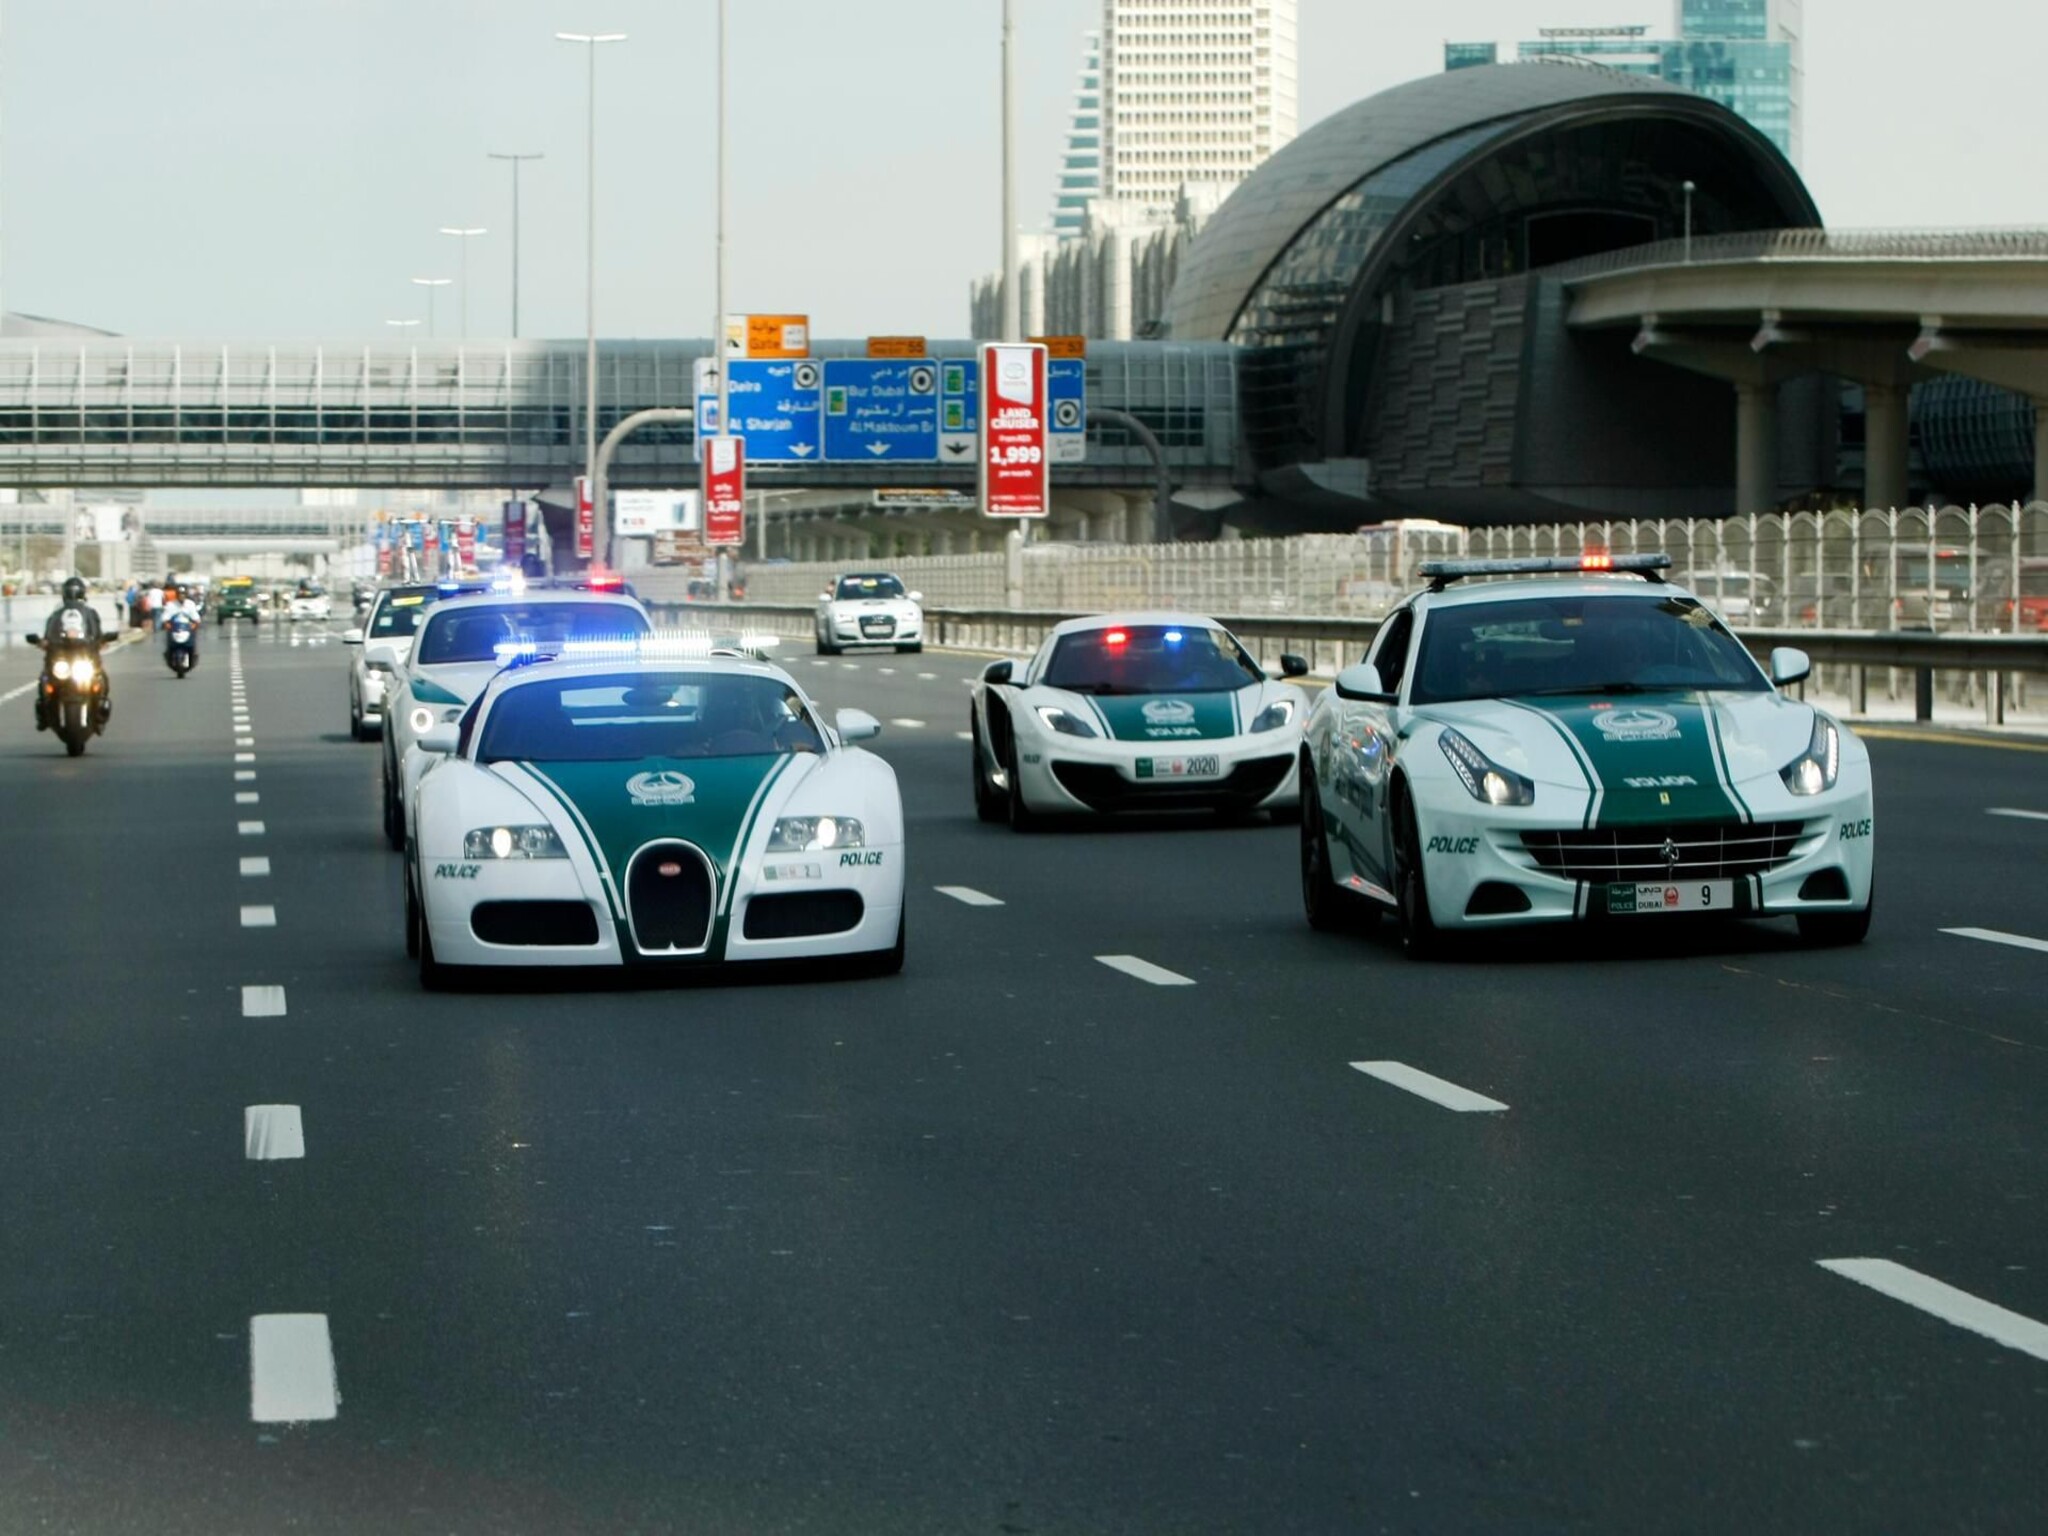 Dubai Police announces the arrest of 494 people due to fraud